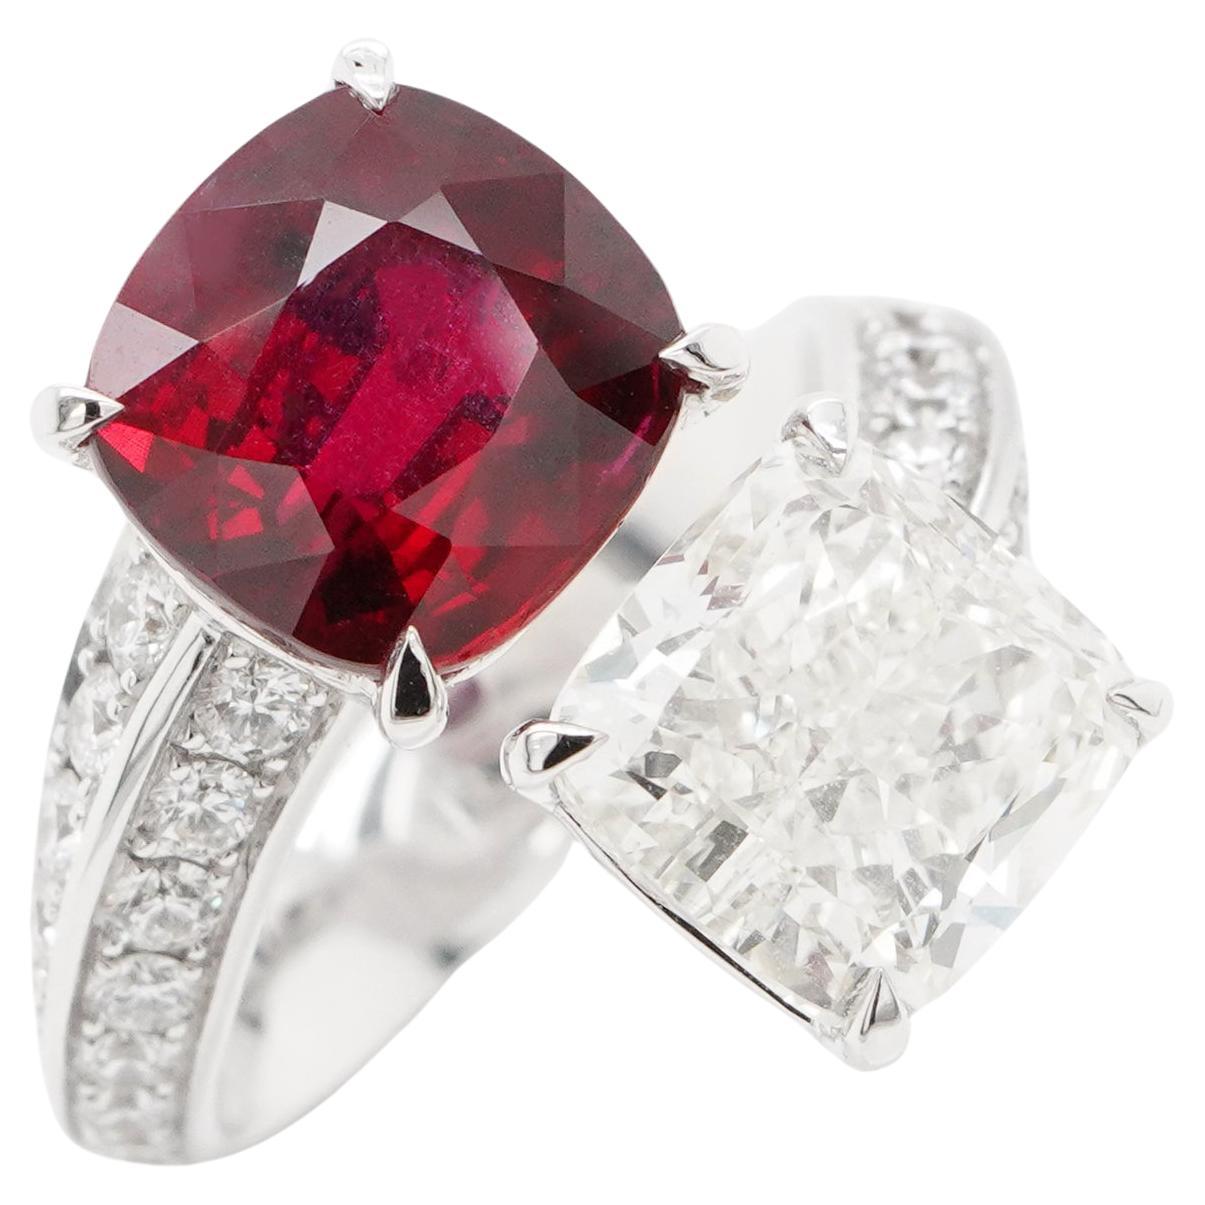 BENJAMIN FINE JEWELRY 5.07 / 3.51 cts Ruby with Diamond 18K Ring For Sale